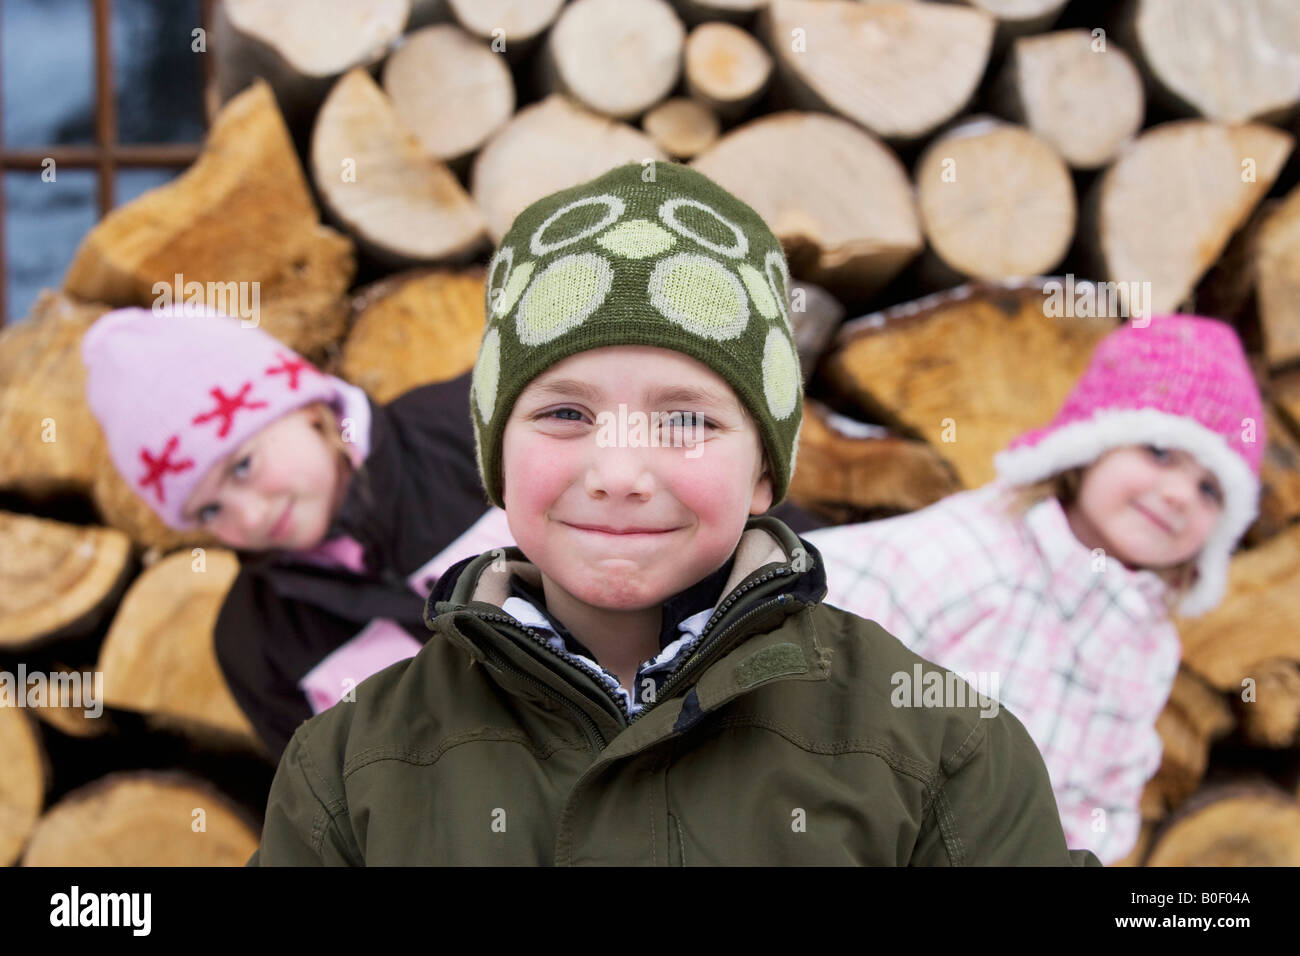 Children posing with winter hats on Stock Photo